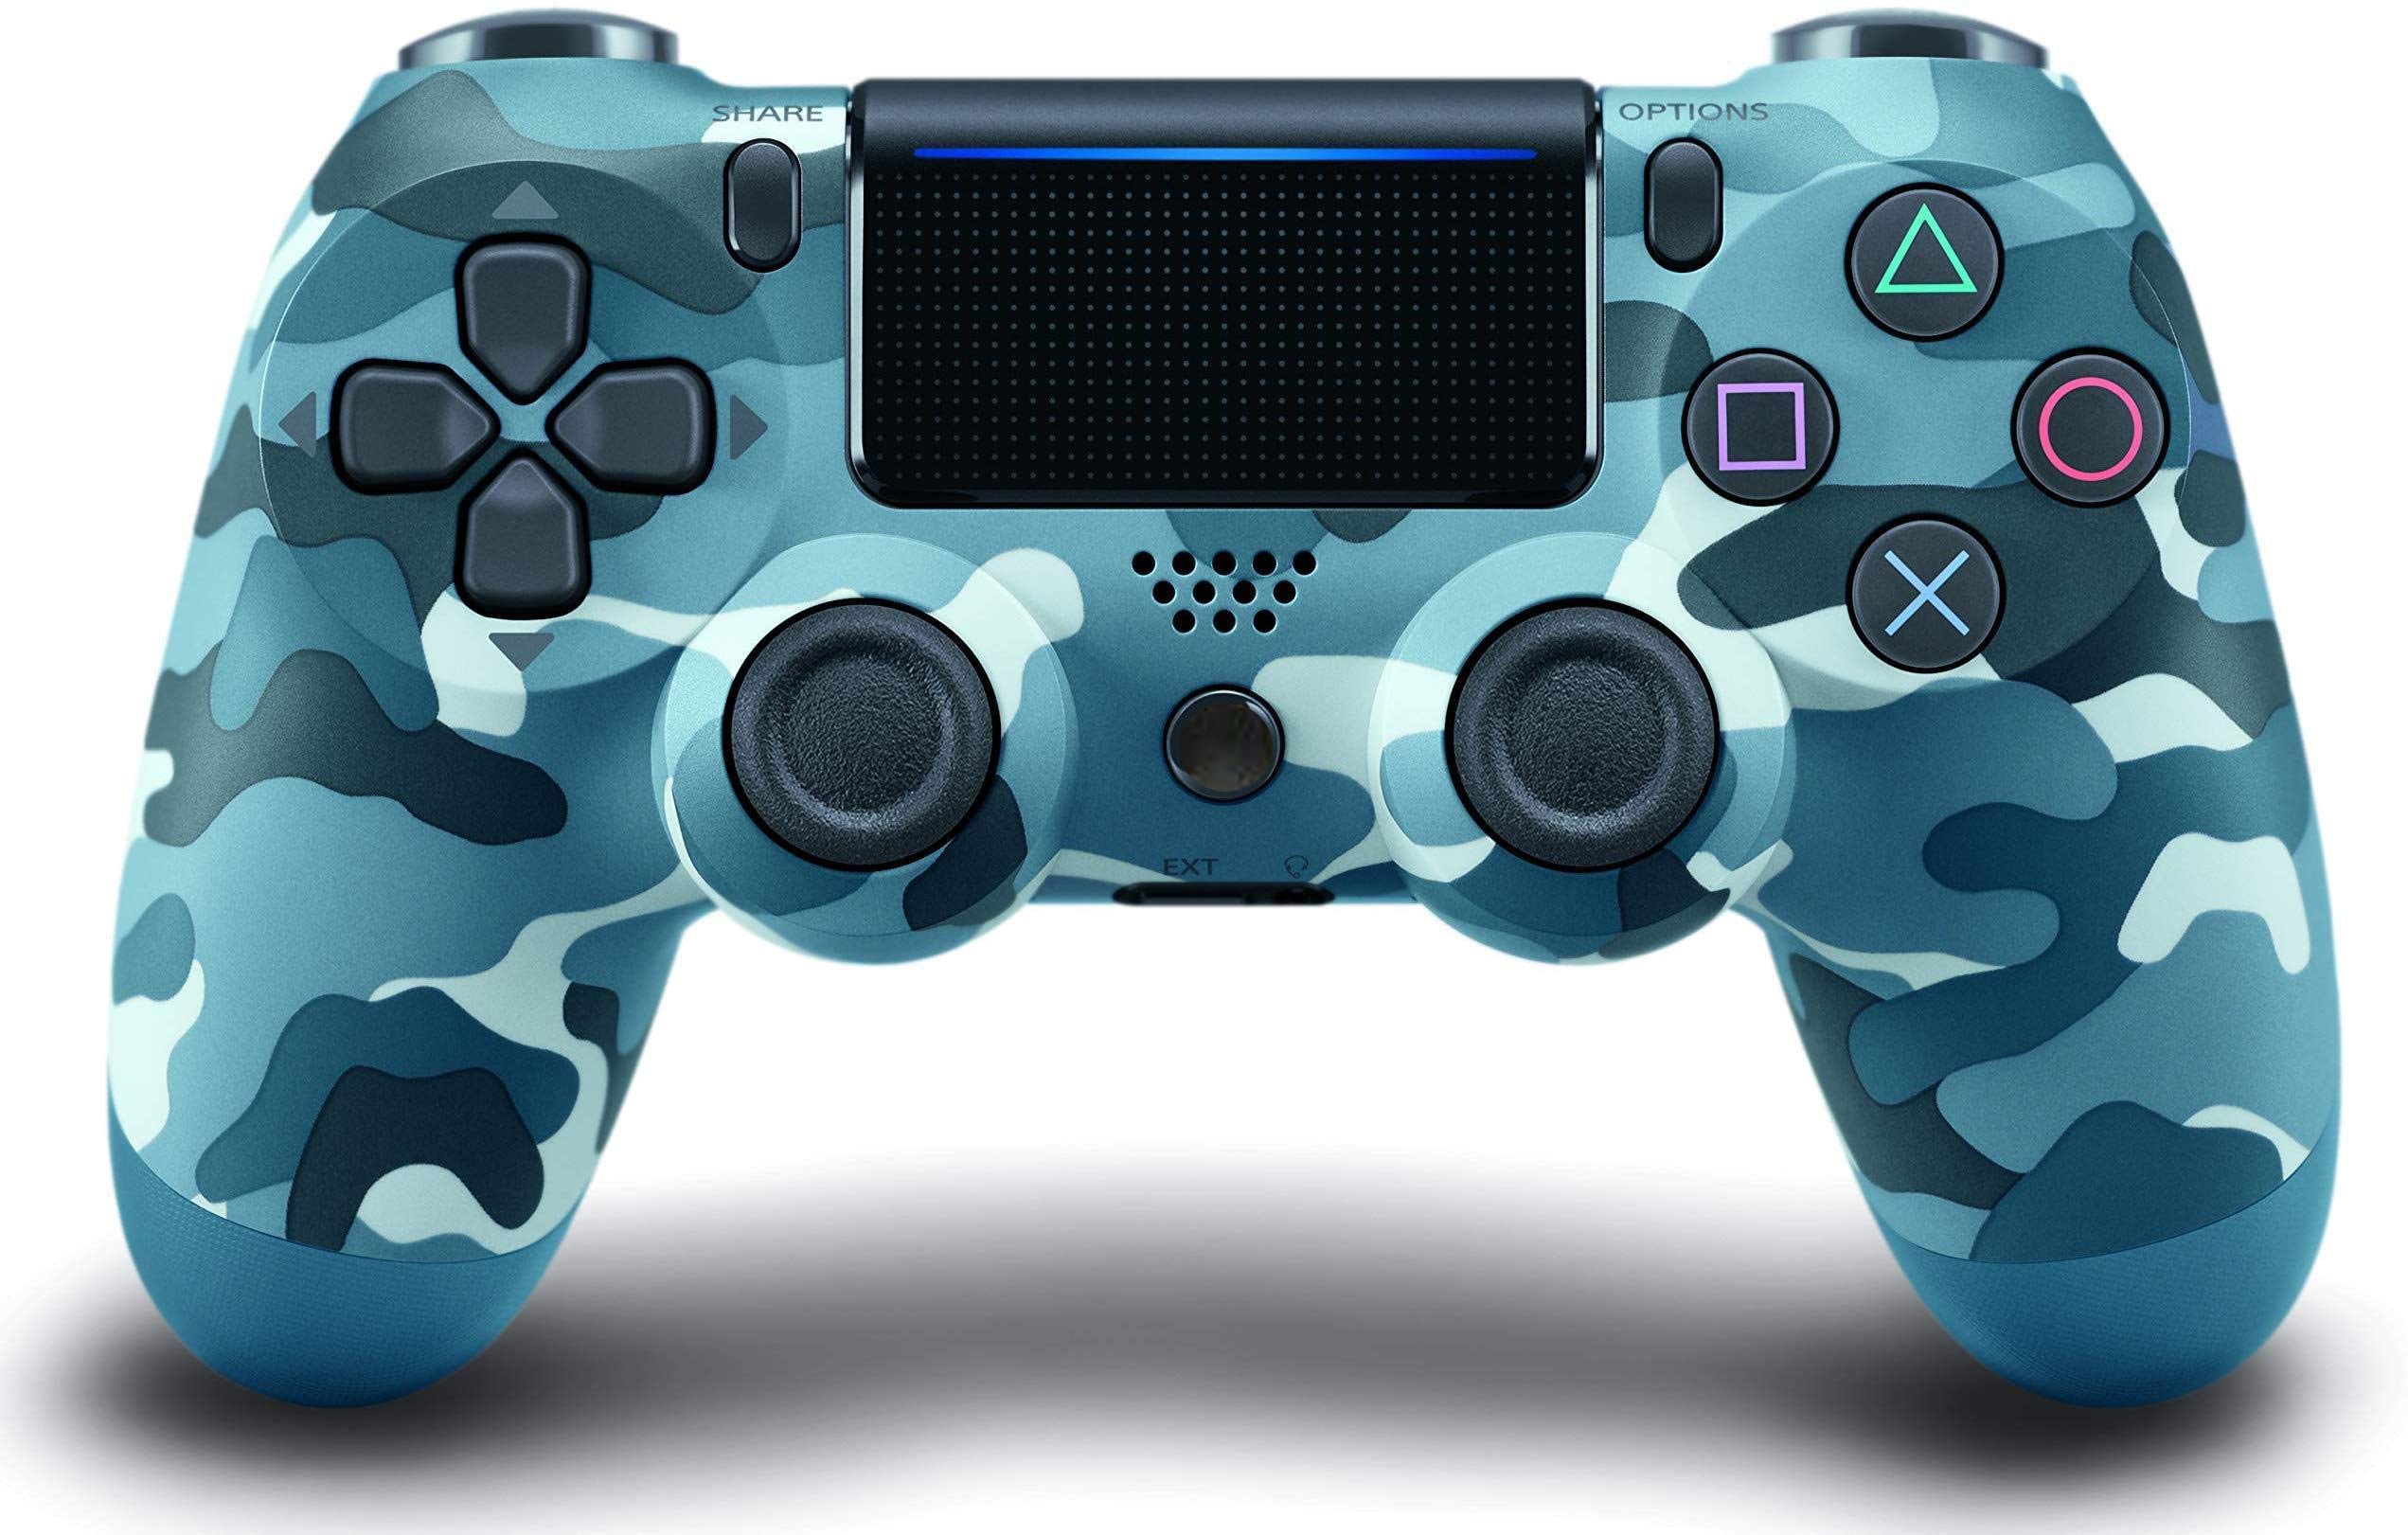 how to bluetooth a ps4 controller